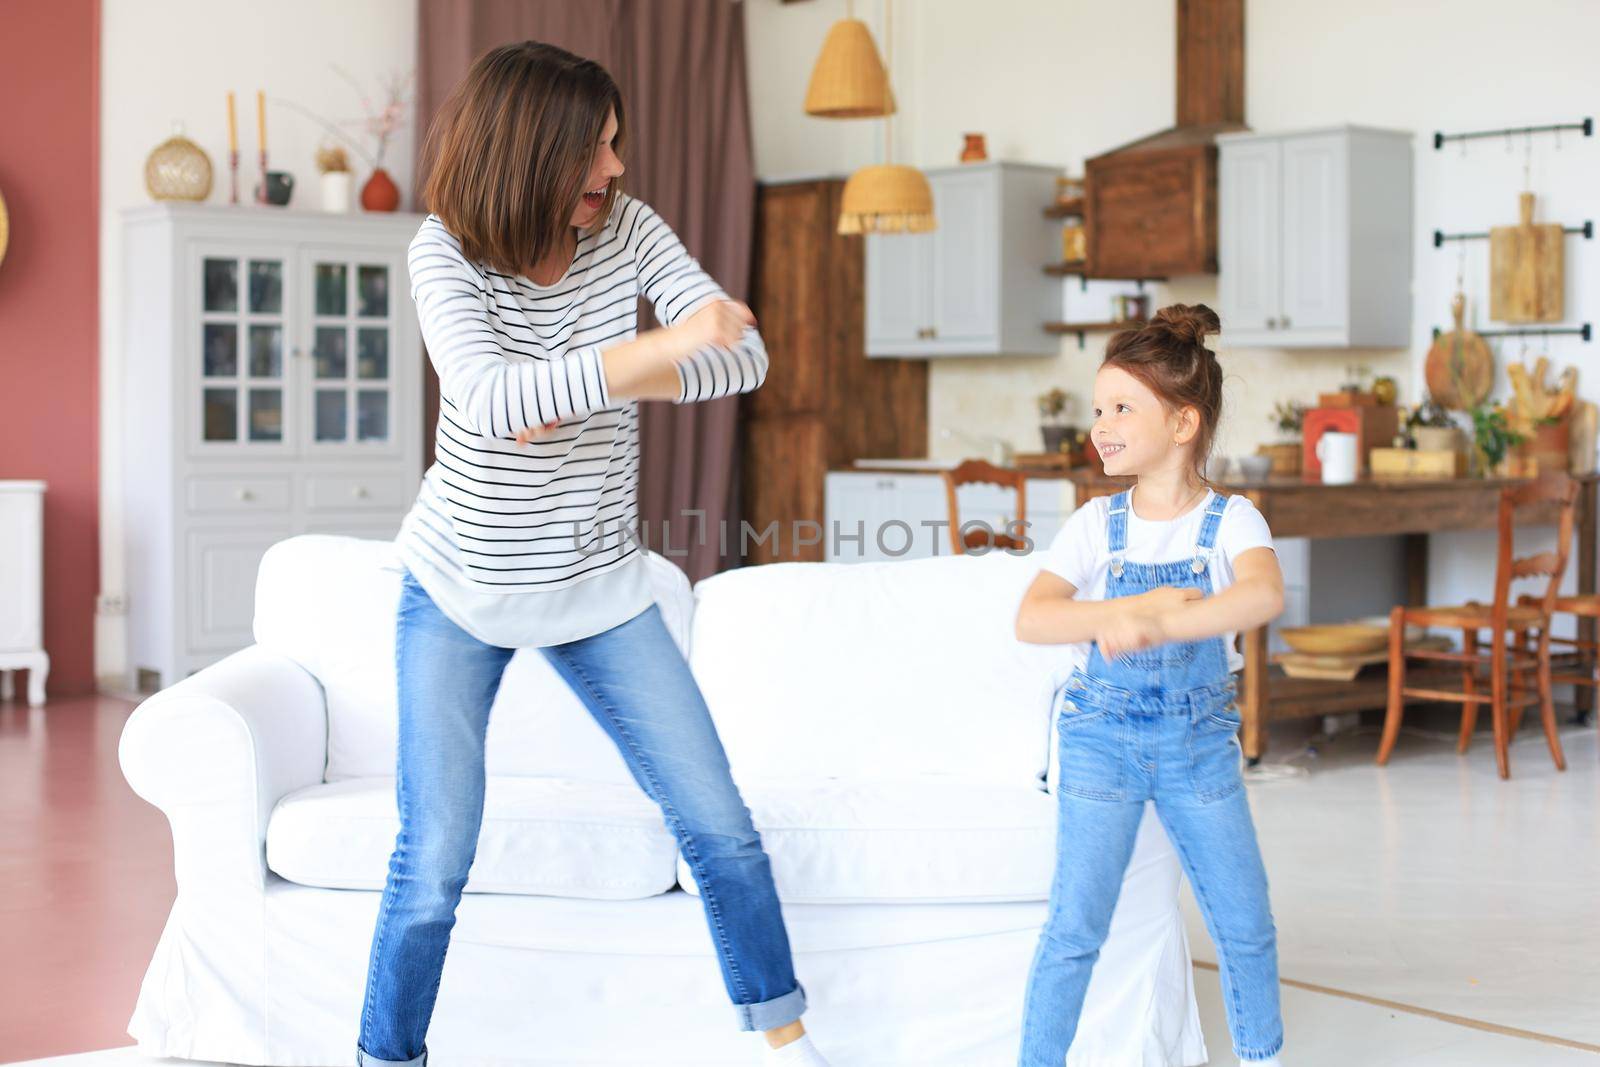 Cheerful mother with little daughter dancing at favourite song in living room at home